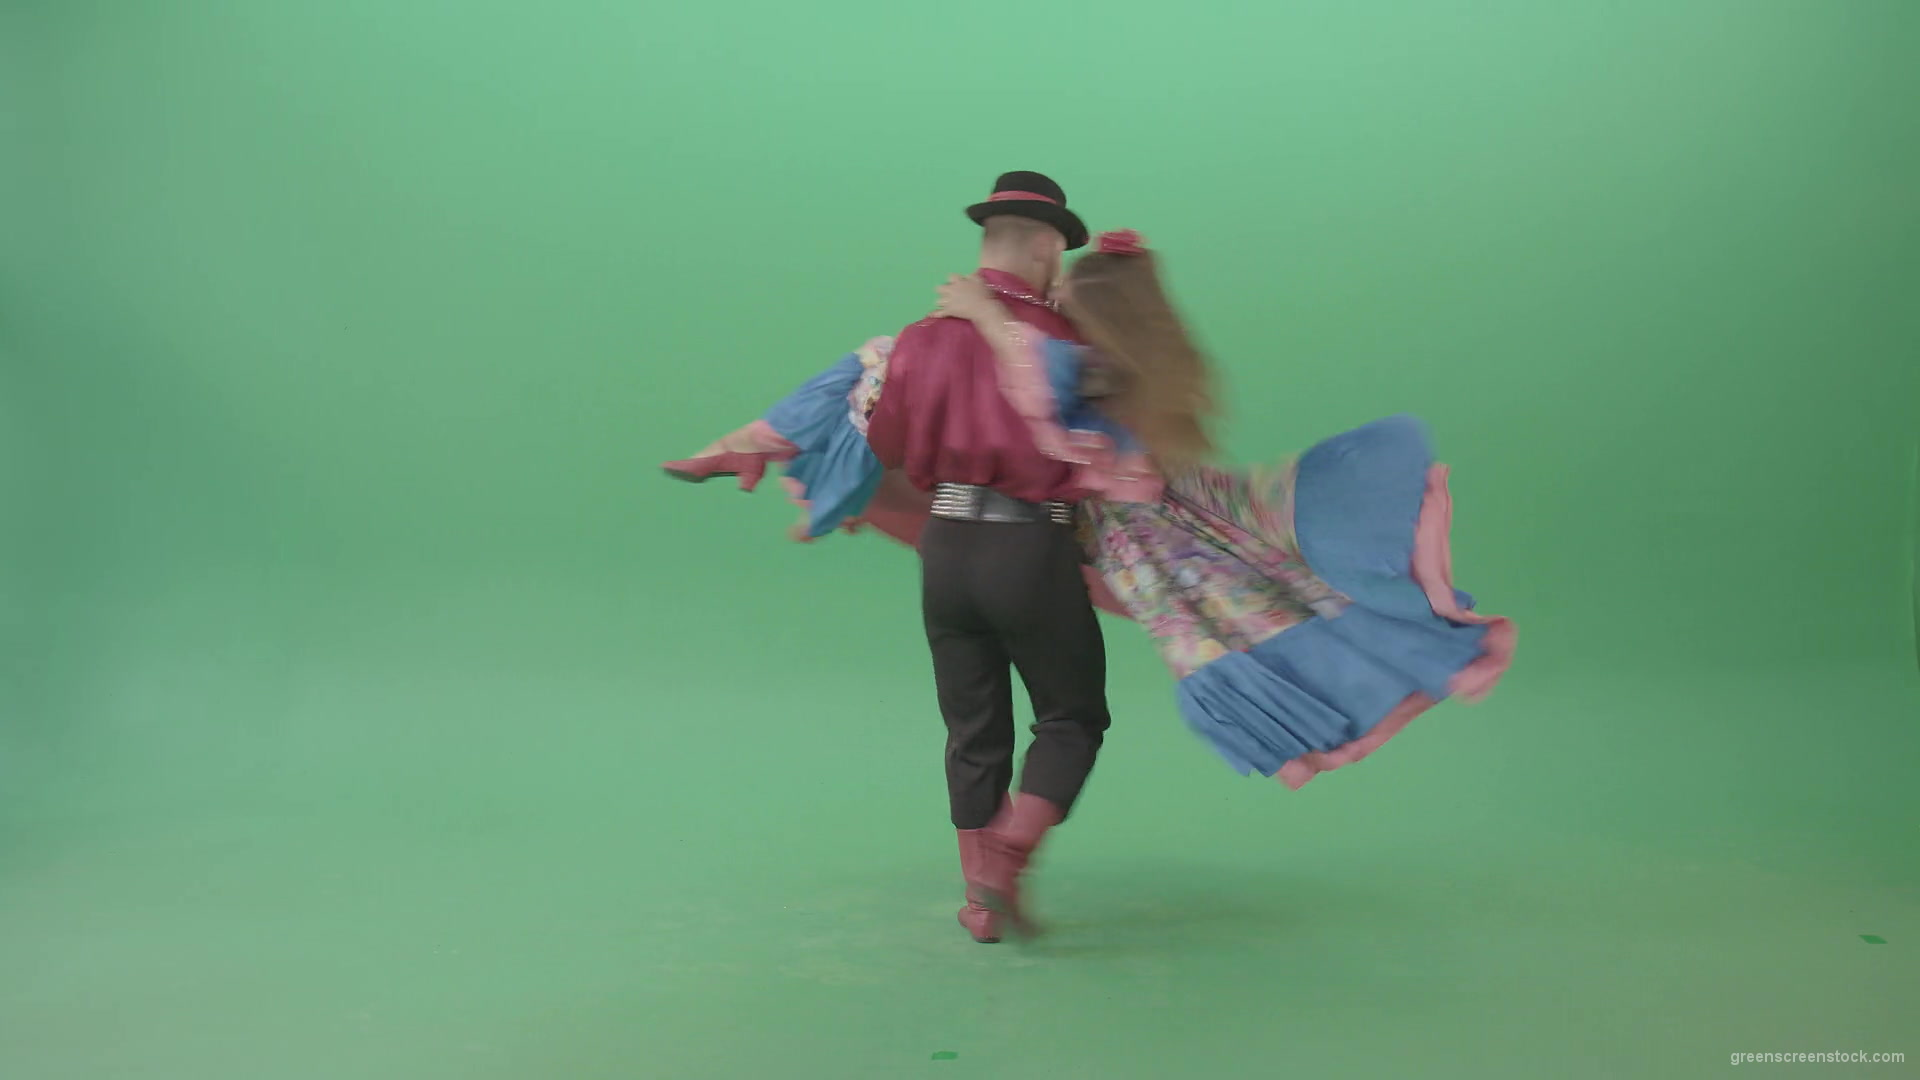 Gypsy-man-and-woman-spinning-dancing-over-green-screen-4K-video-footage-1920_005 Green Screen Stock